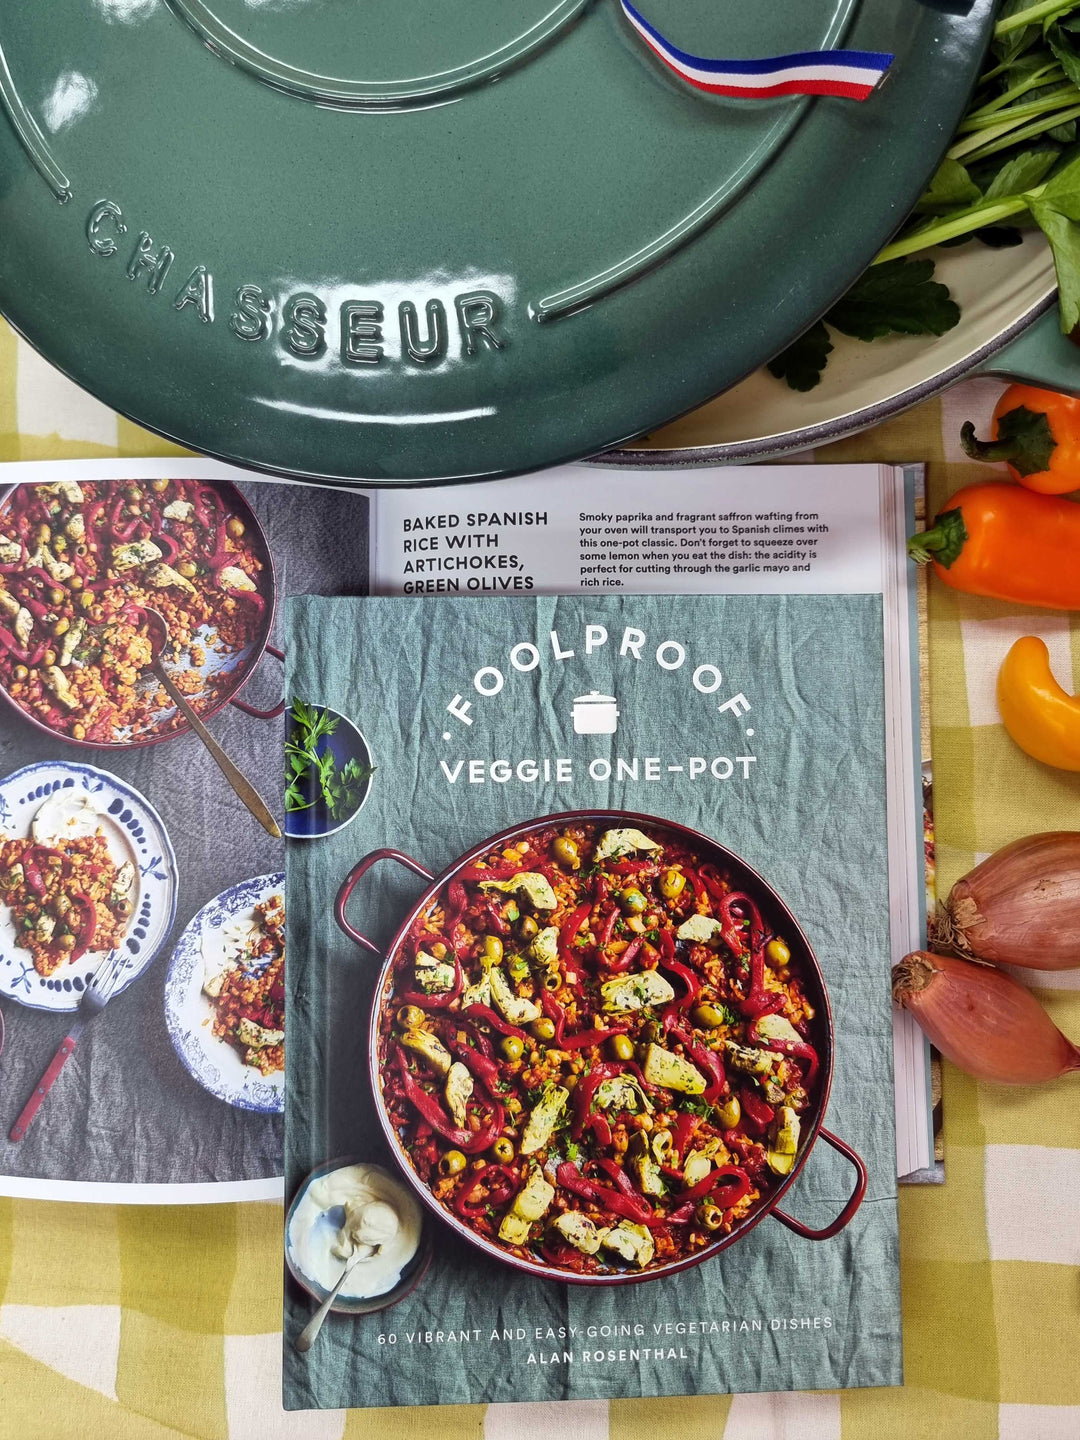 Foolproof Veggie One-Pot By Alan Rosenthal